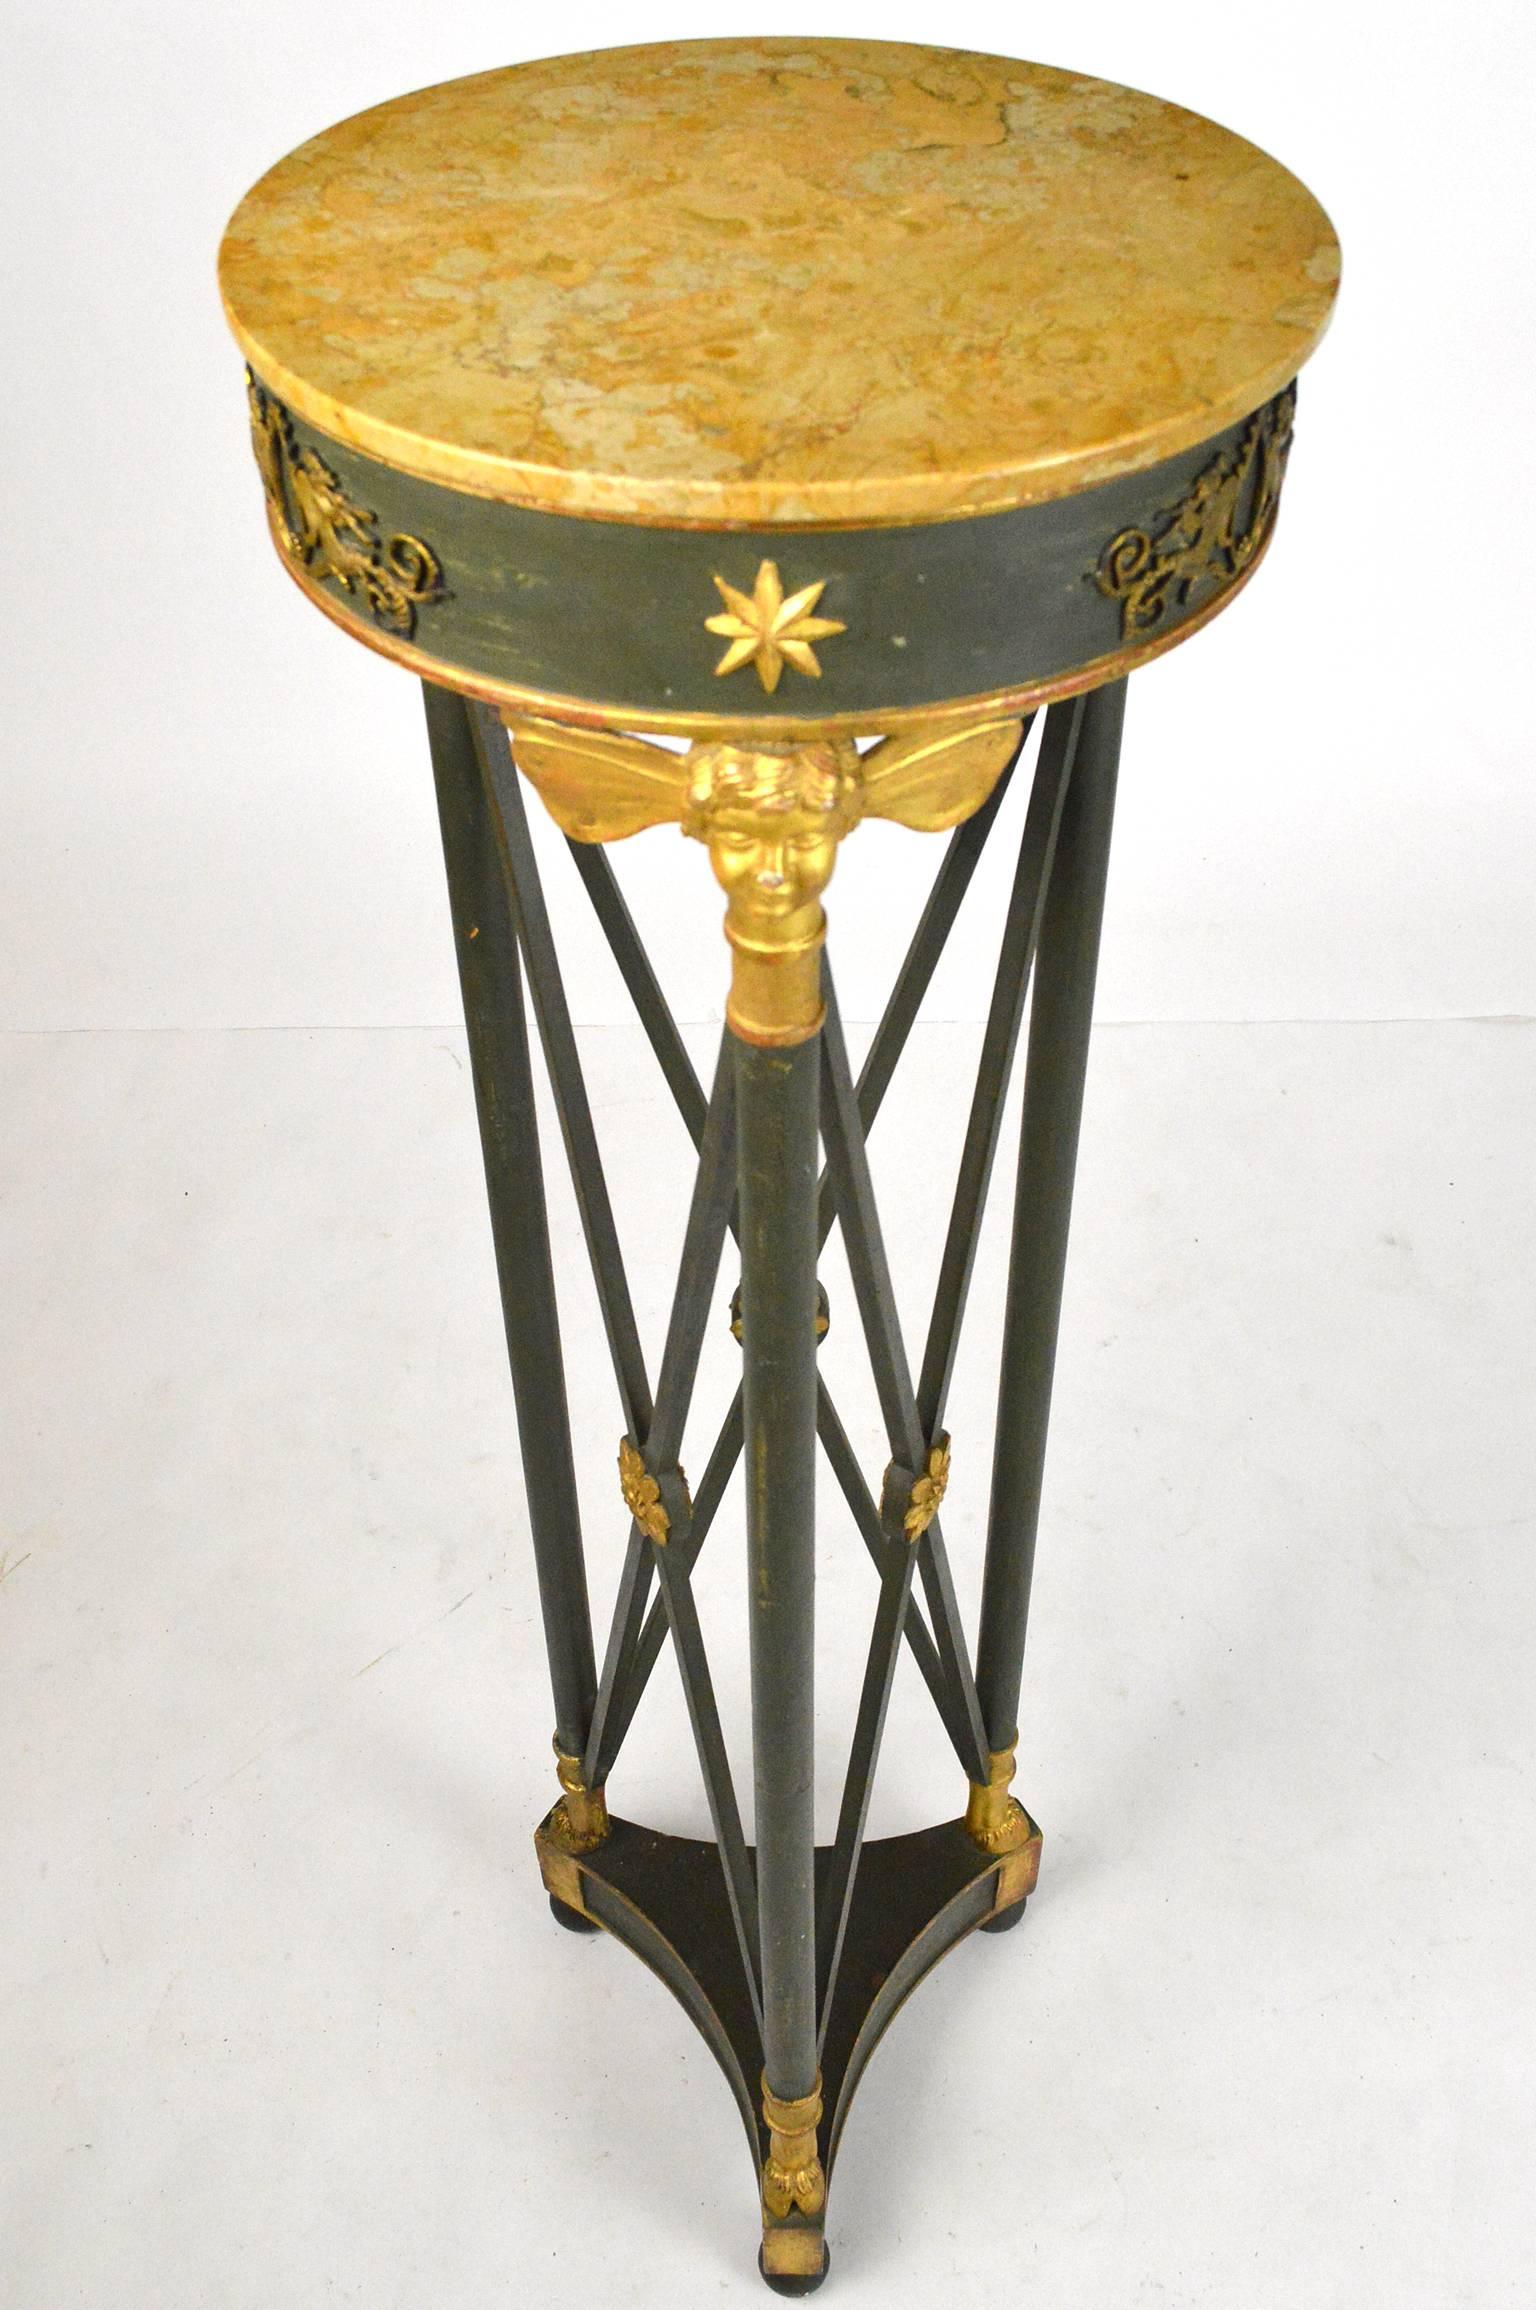 French Empire style gilt and painted wood pedestal beautifully carved having gilt bronze mount around top with original marble top.